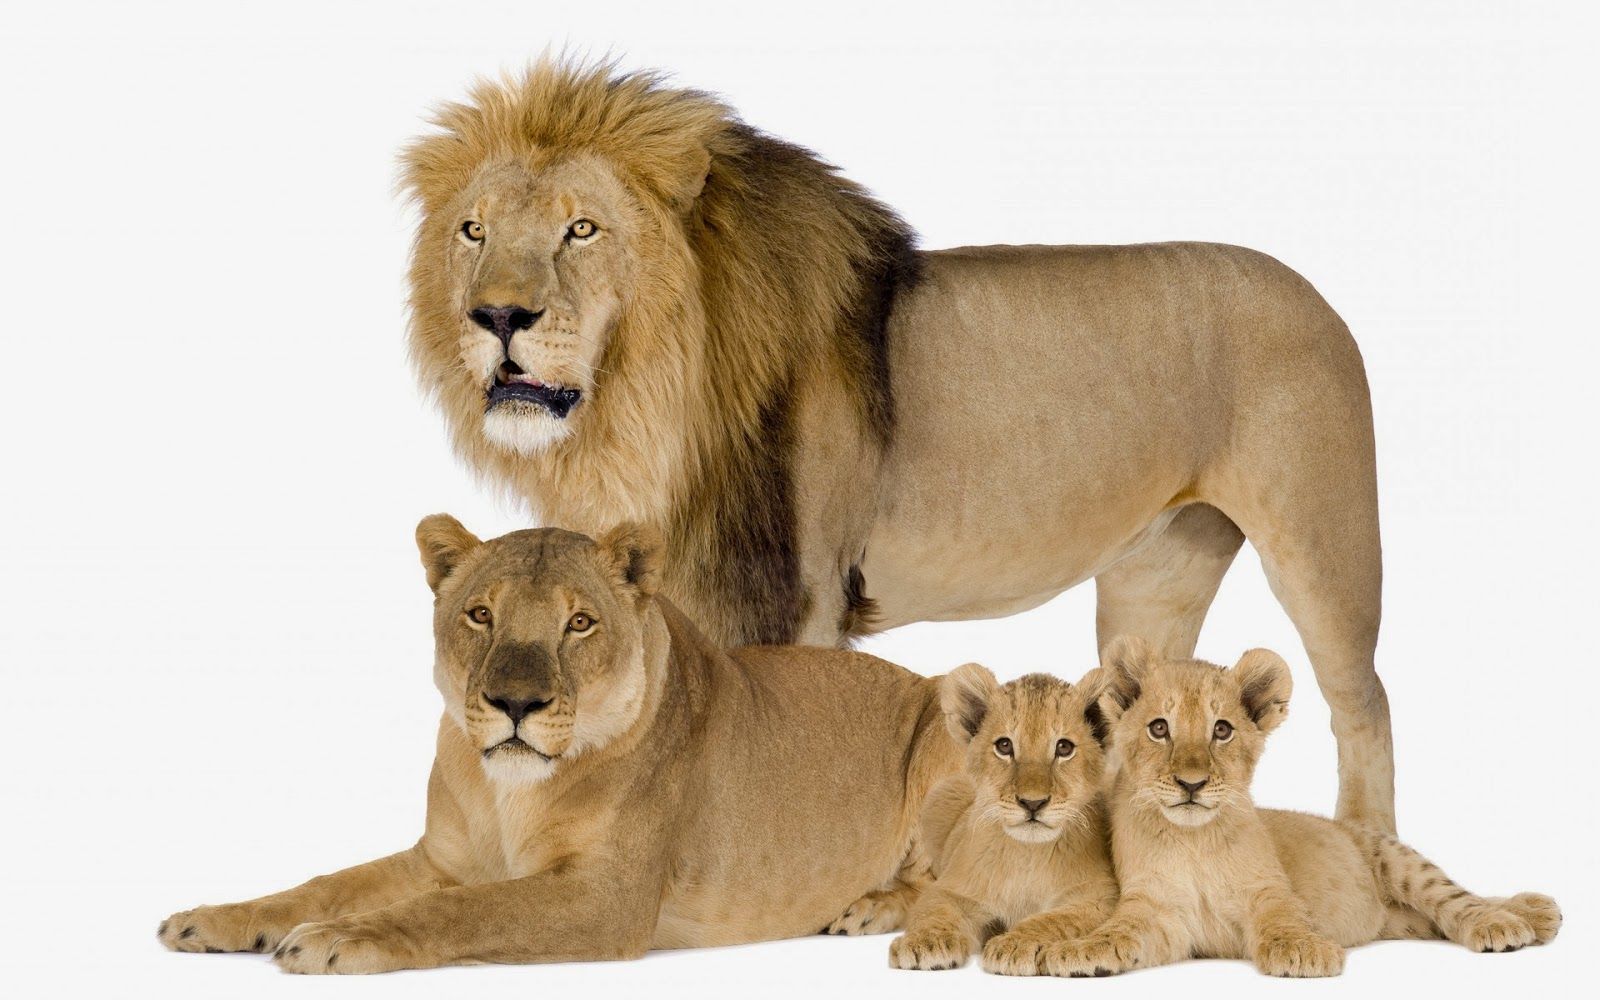 HD Lions Wallpaper and Photo. Lion family, Lion facts, Panthera leo